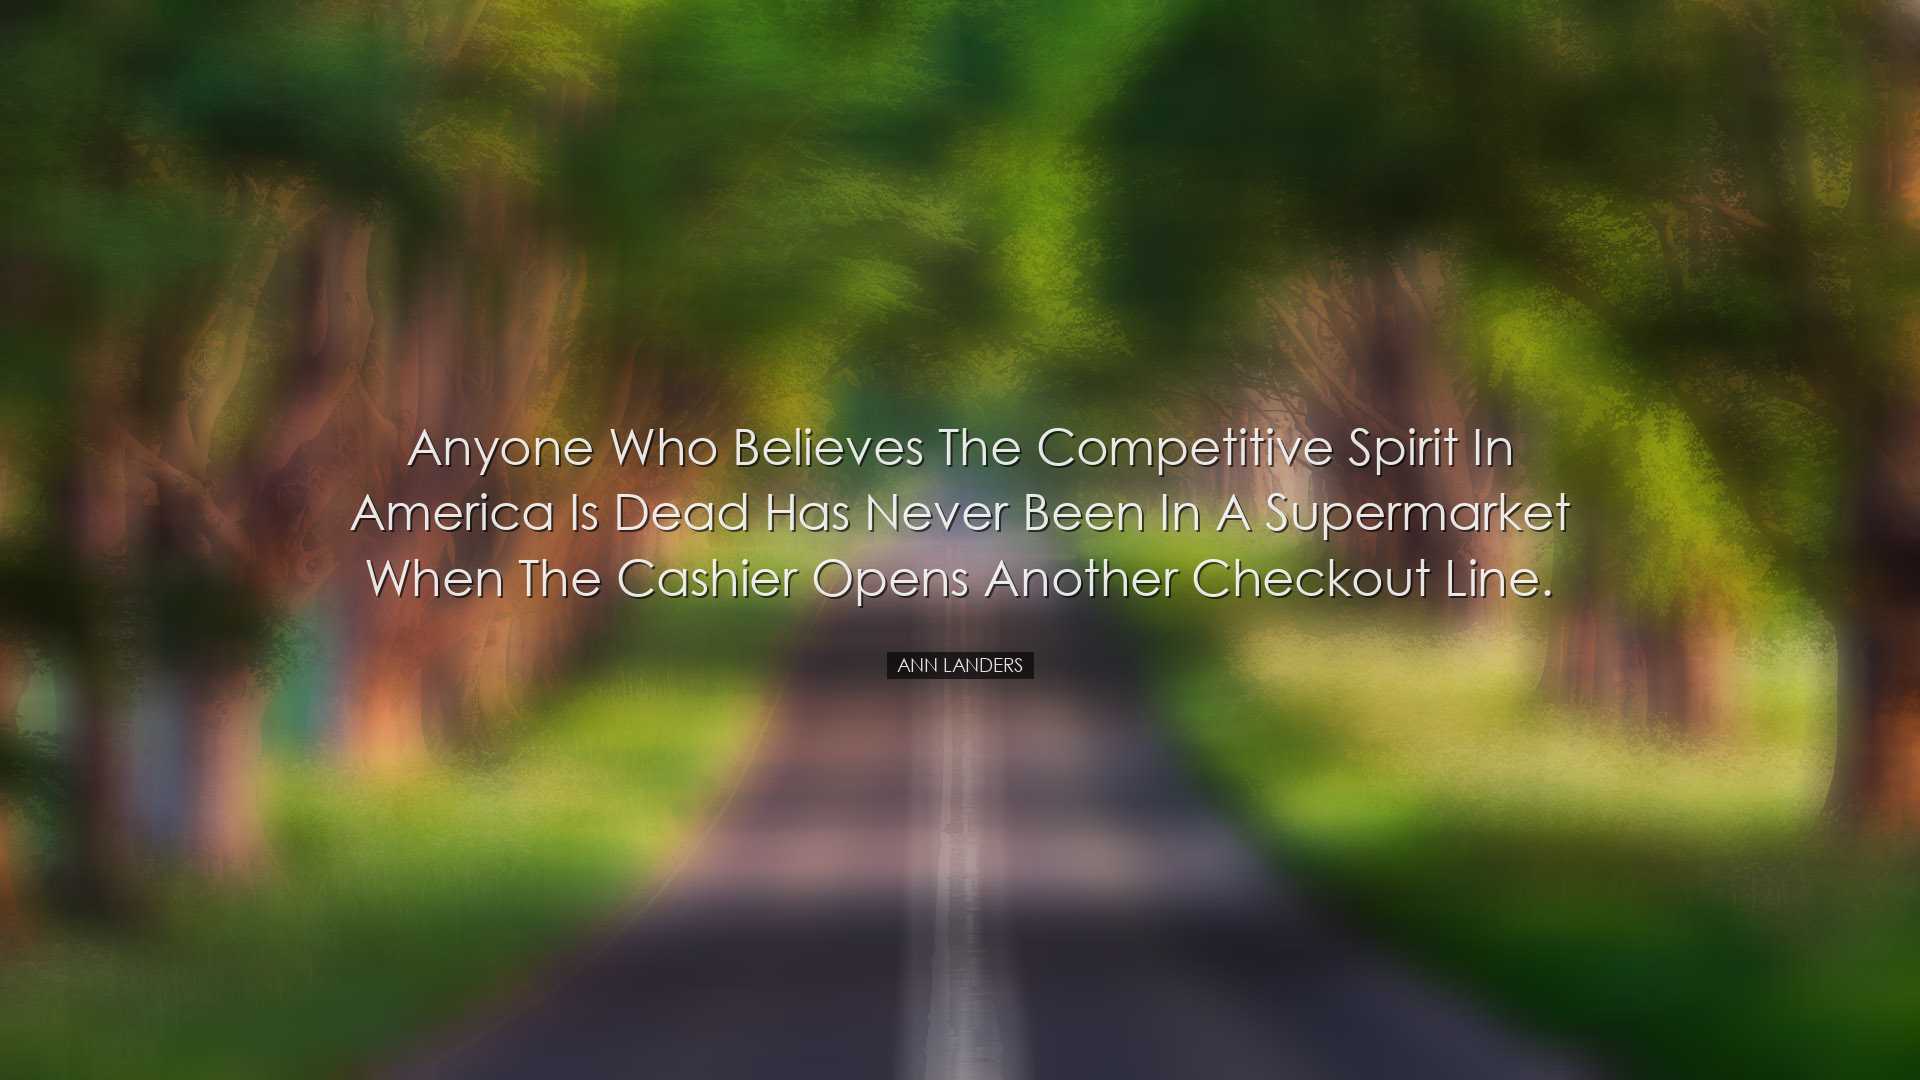 Anyone who believes the competitive spirit in America is dead has